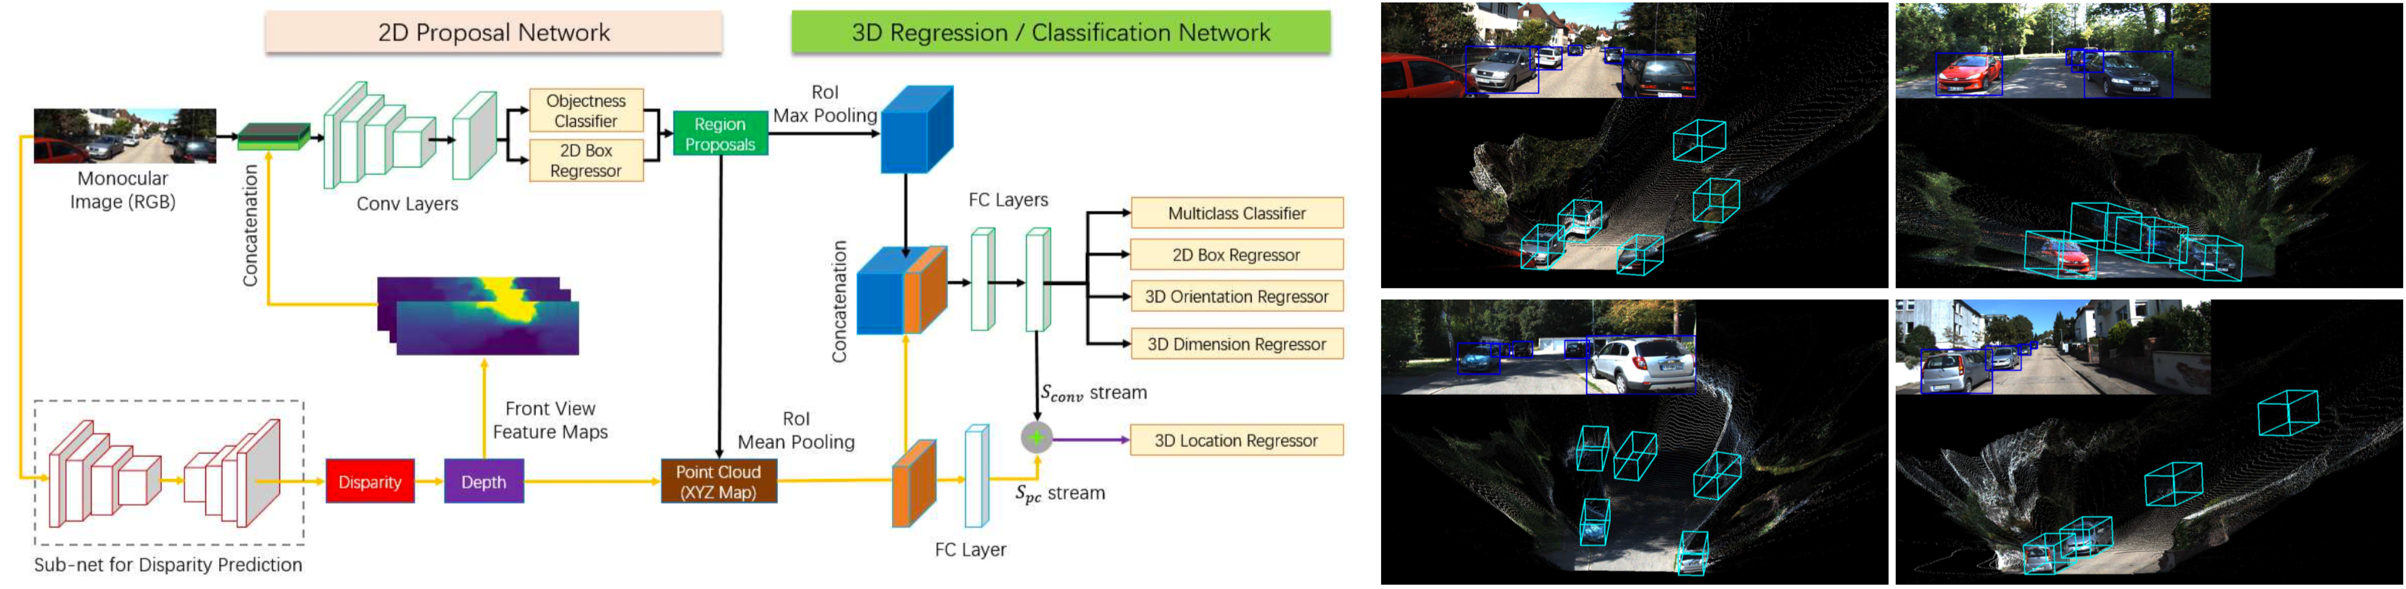 fukuhara-Multi-Level-Fusion-Based-3D-Object-Detection-From-Monocular-Images.png